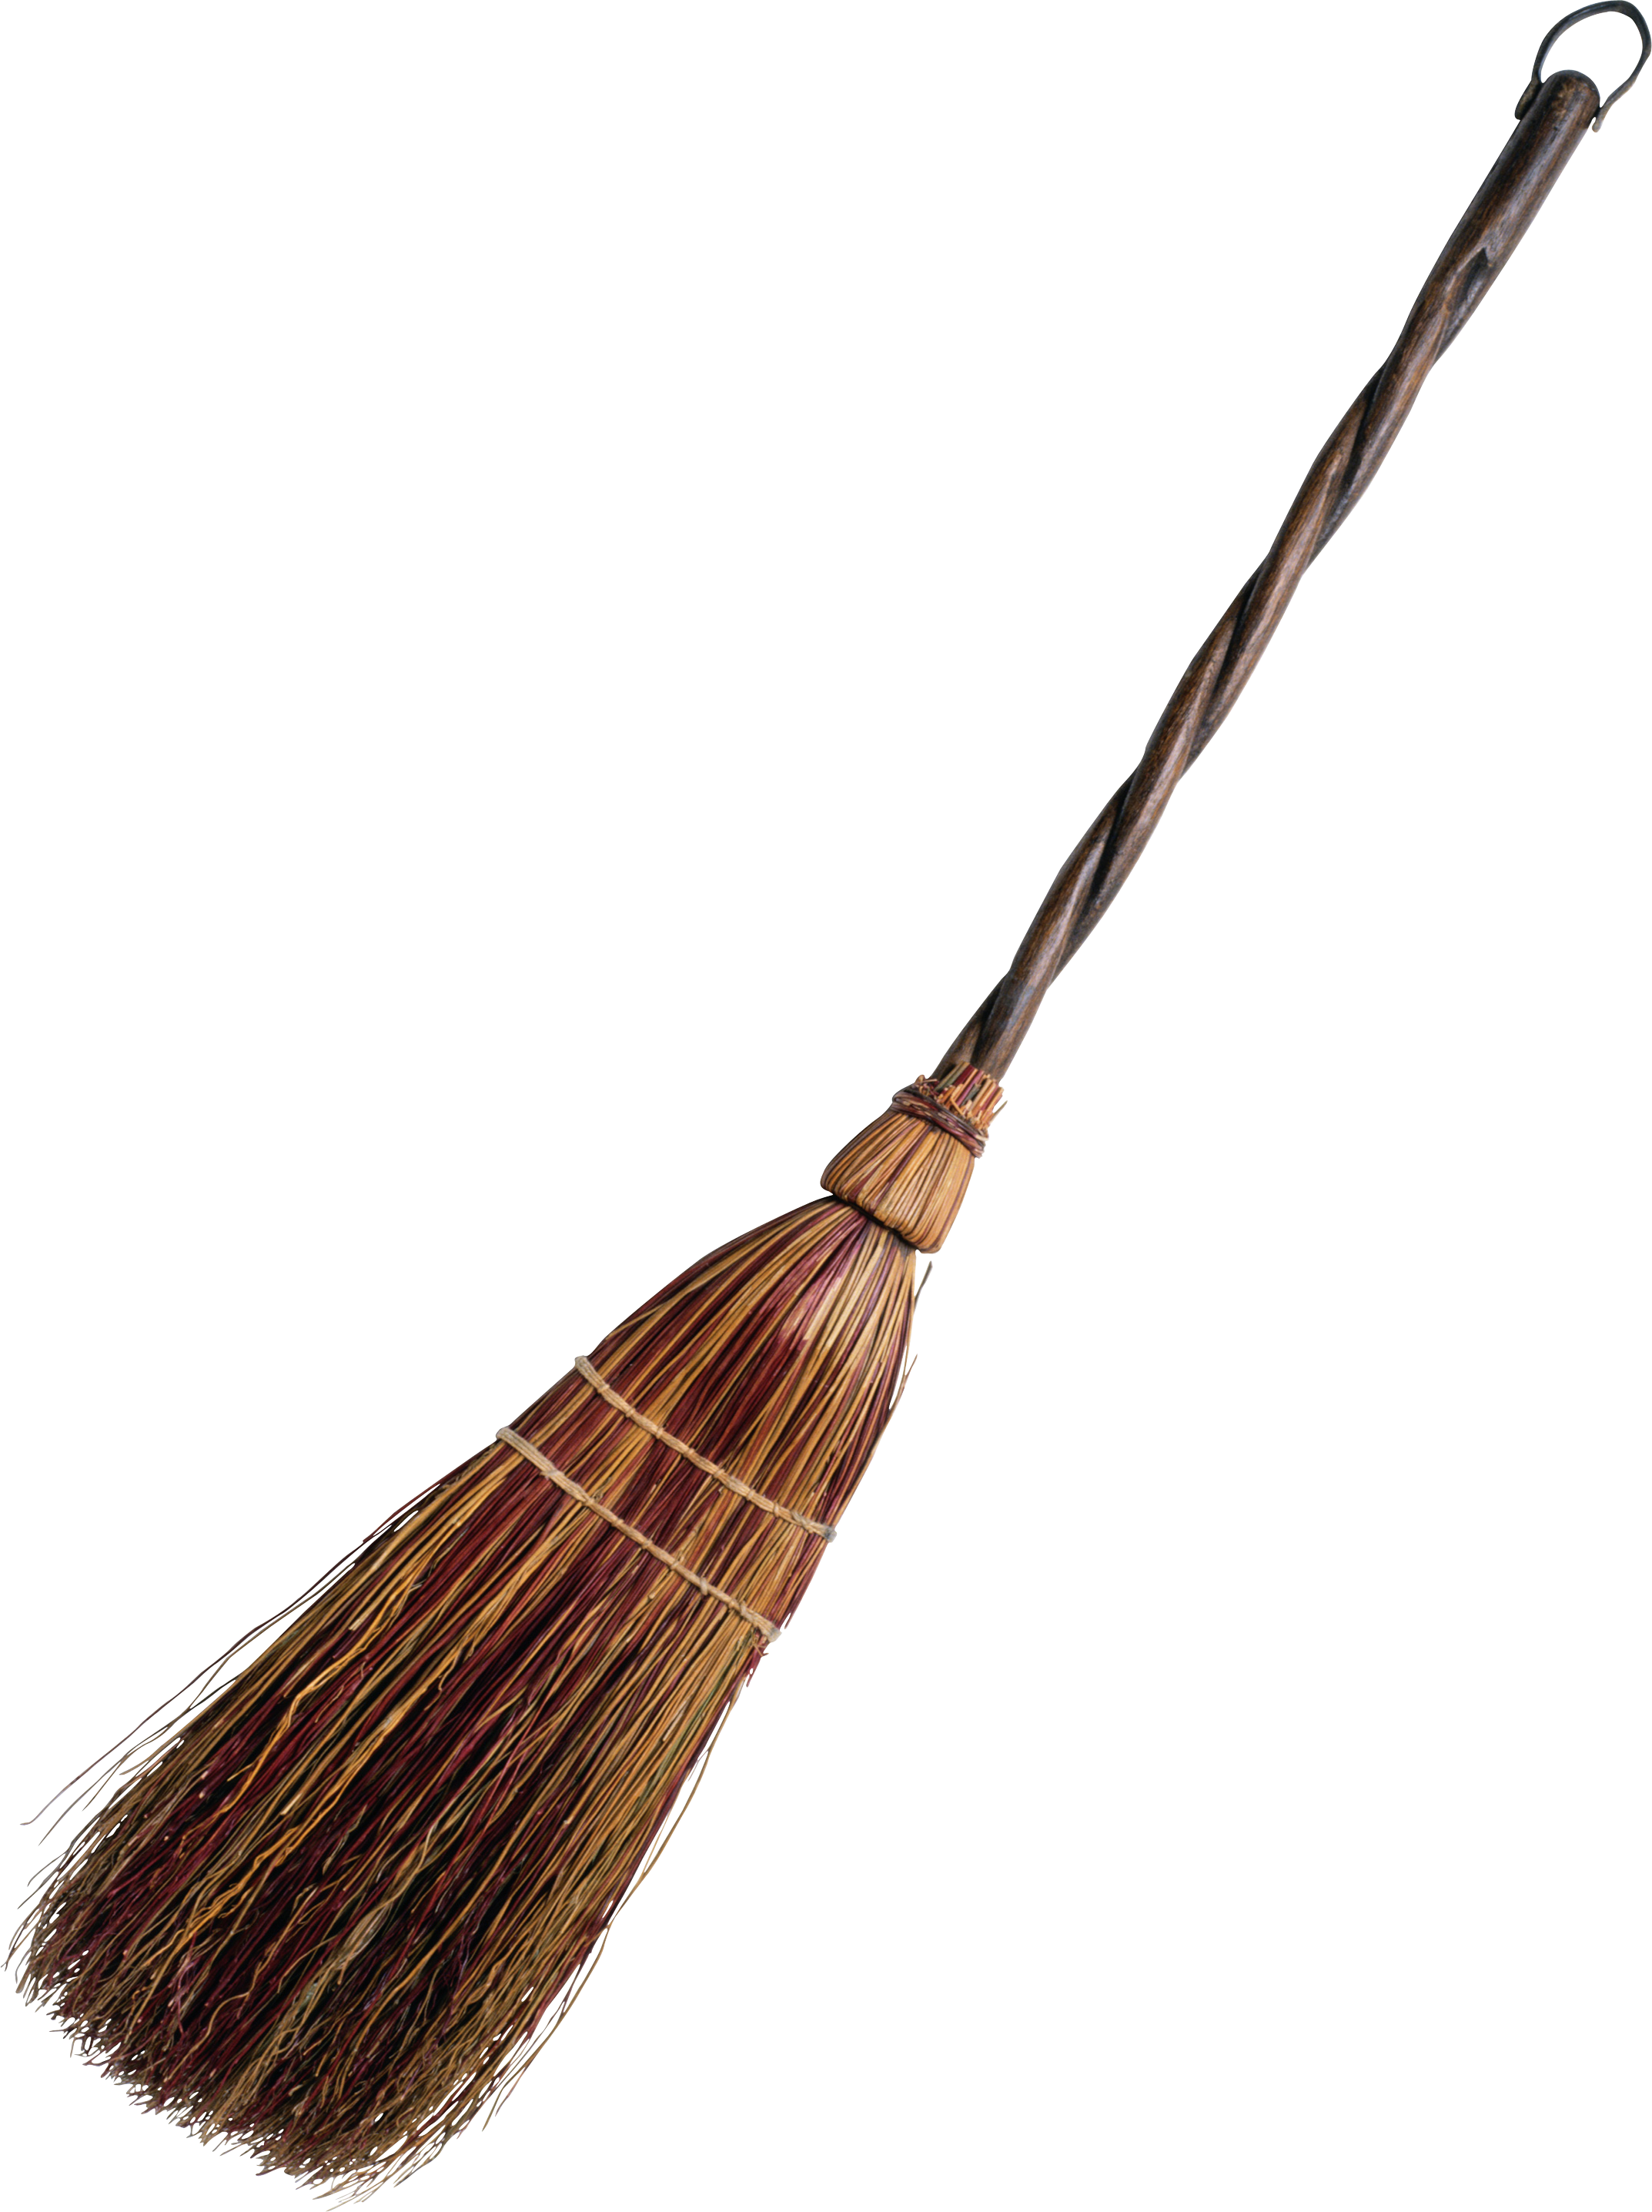 Broomstick PNG clipart